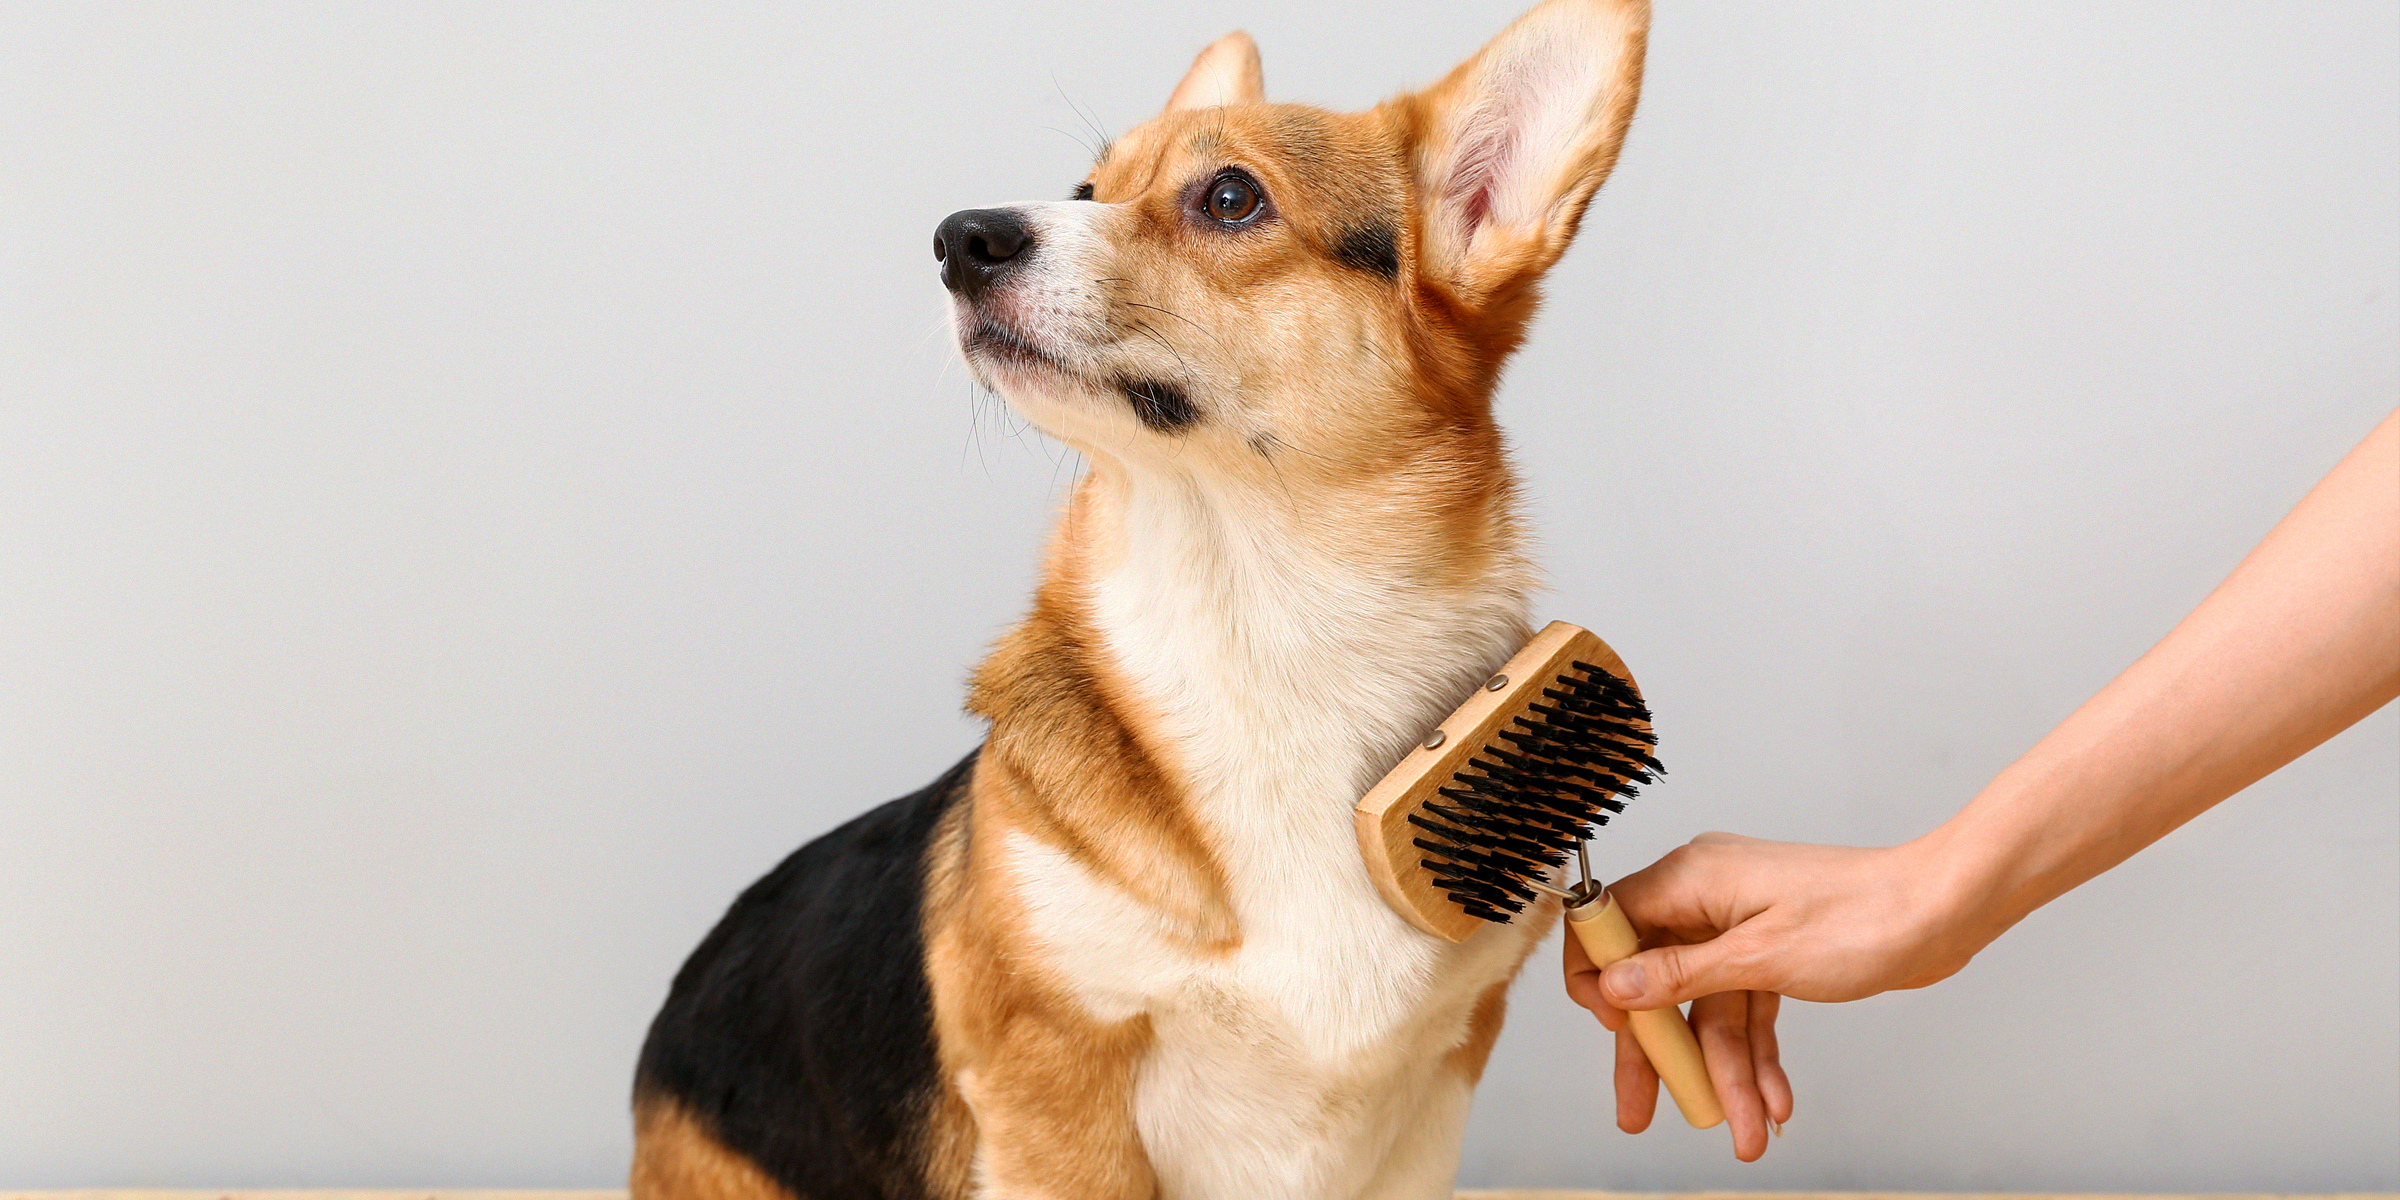 A dog being groomed | Source: Shutterstock